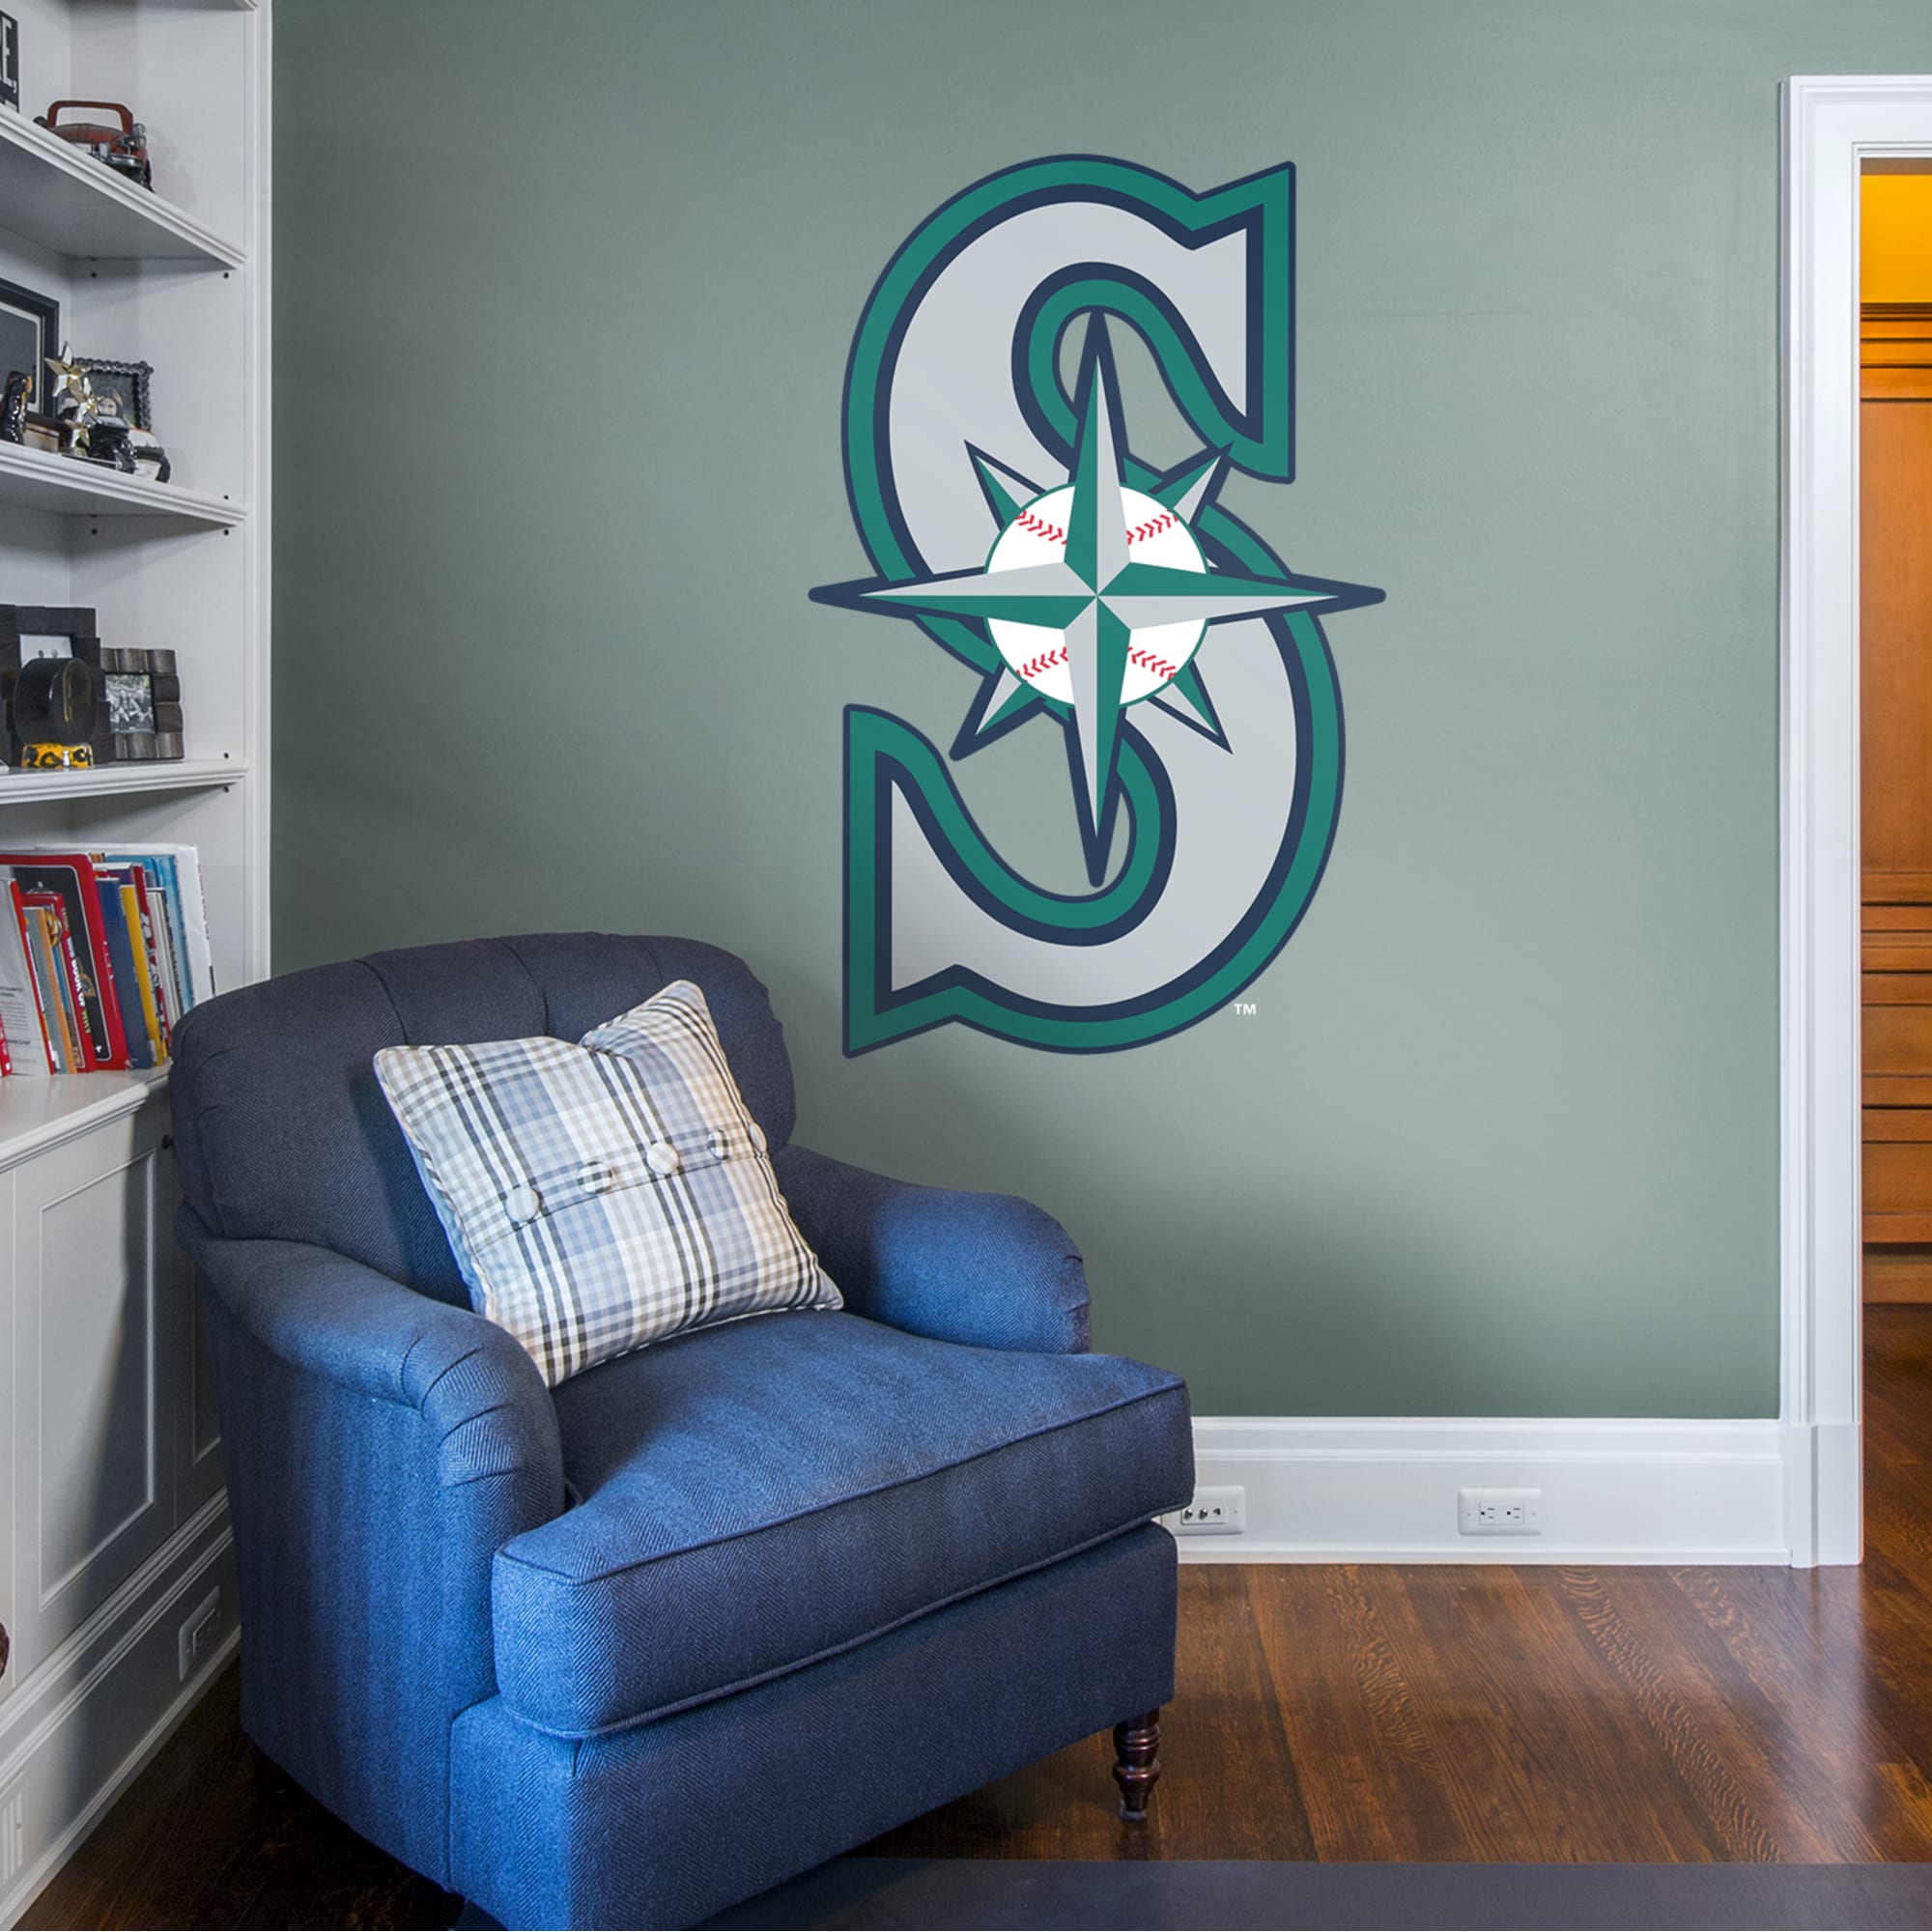 Seattle Mariners: Alternate Logo - Officially Licensed MLB Removable Wall Decal 33"W x 52"H by Fathead | Vinyl